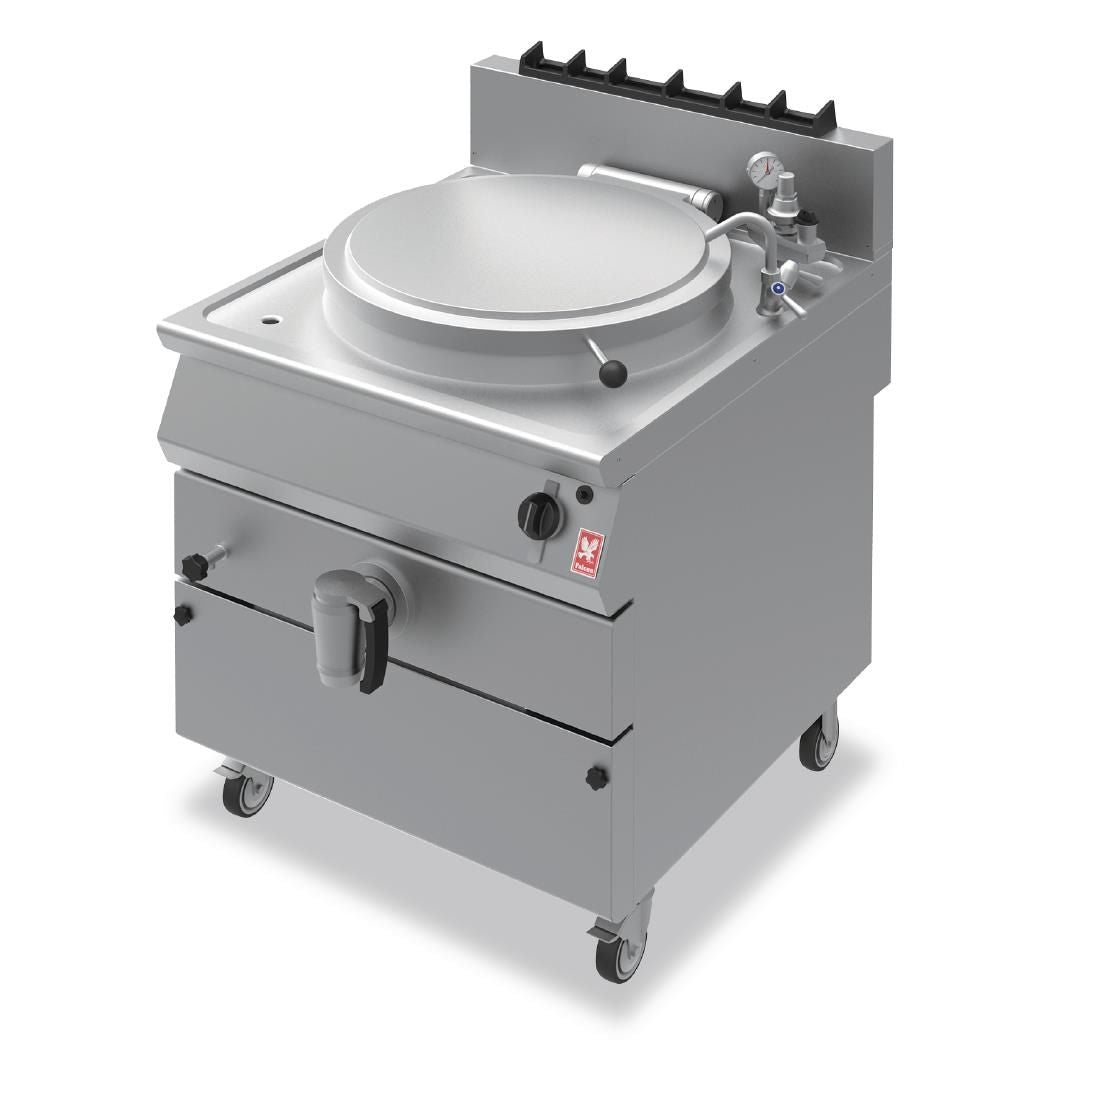 Falcon F900 Boiling Pan Natural Gas G9781 JD Catering Equipment Solutions Ltd